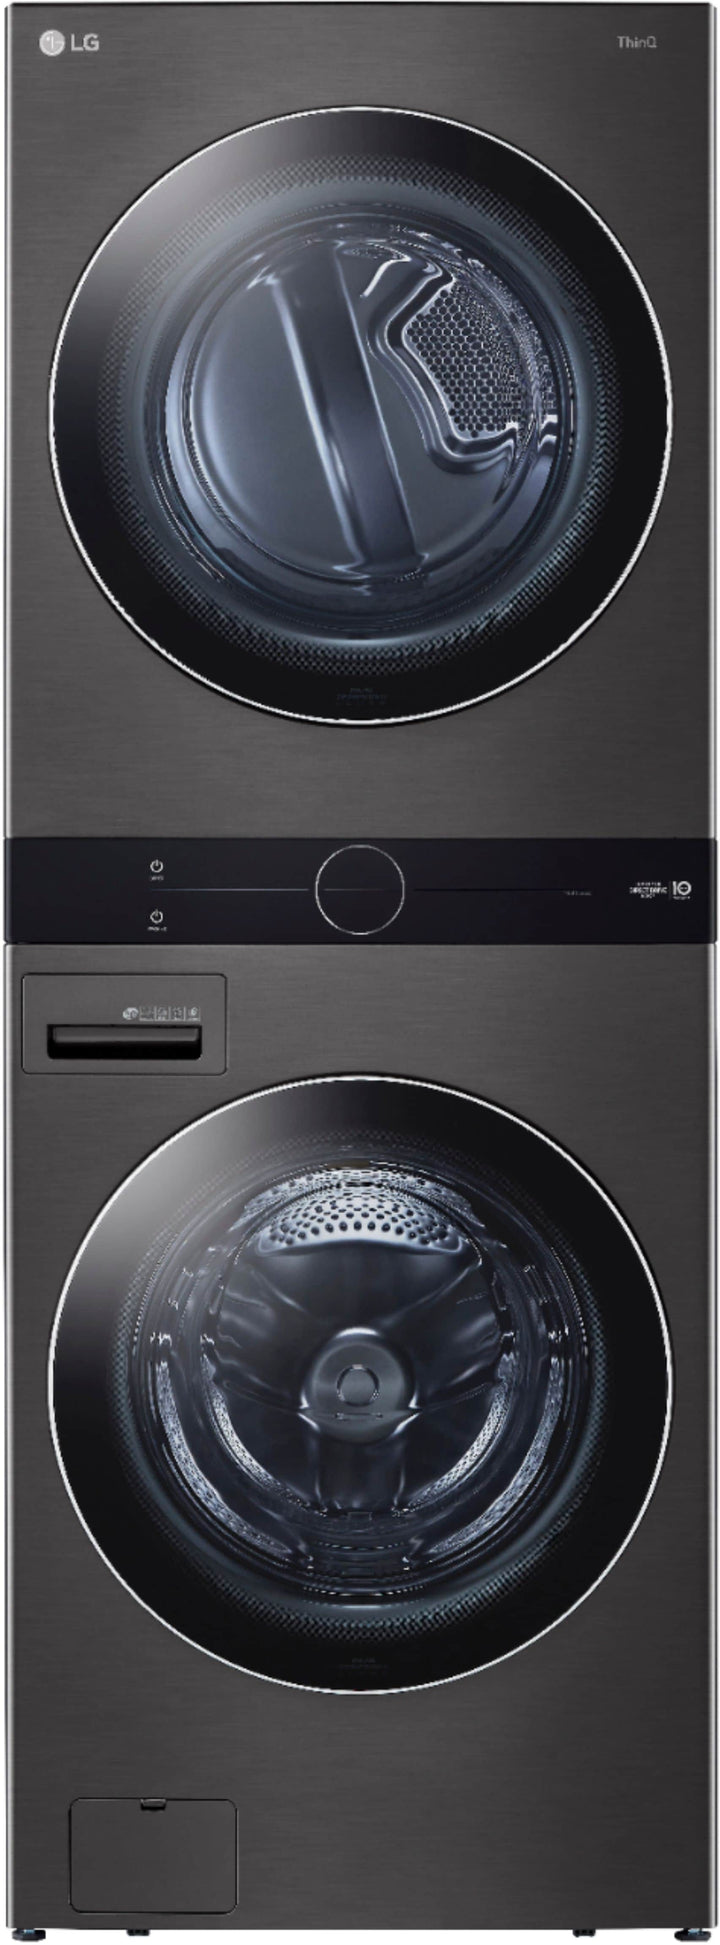 LG - 4.5 Cu. Ft. HE Smart Front Load Washer and 7.4 Cu. Ft. Electric Dryer WashTower with Steam and Built-In Intelligence - Black steel_12